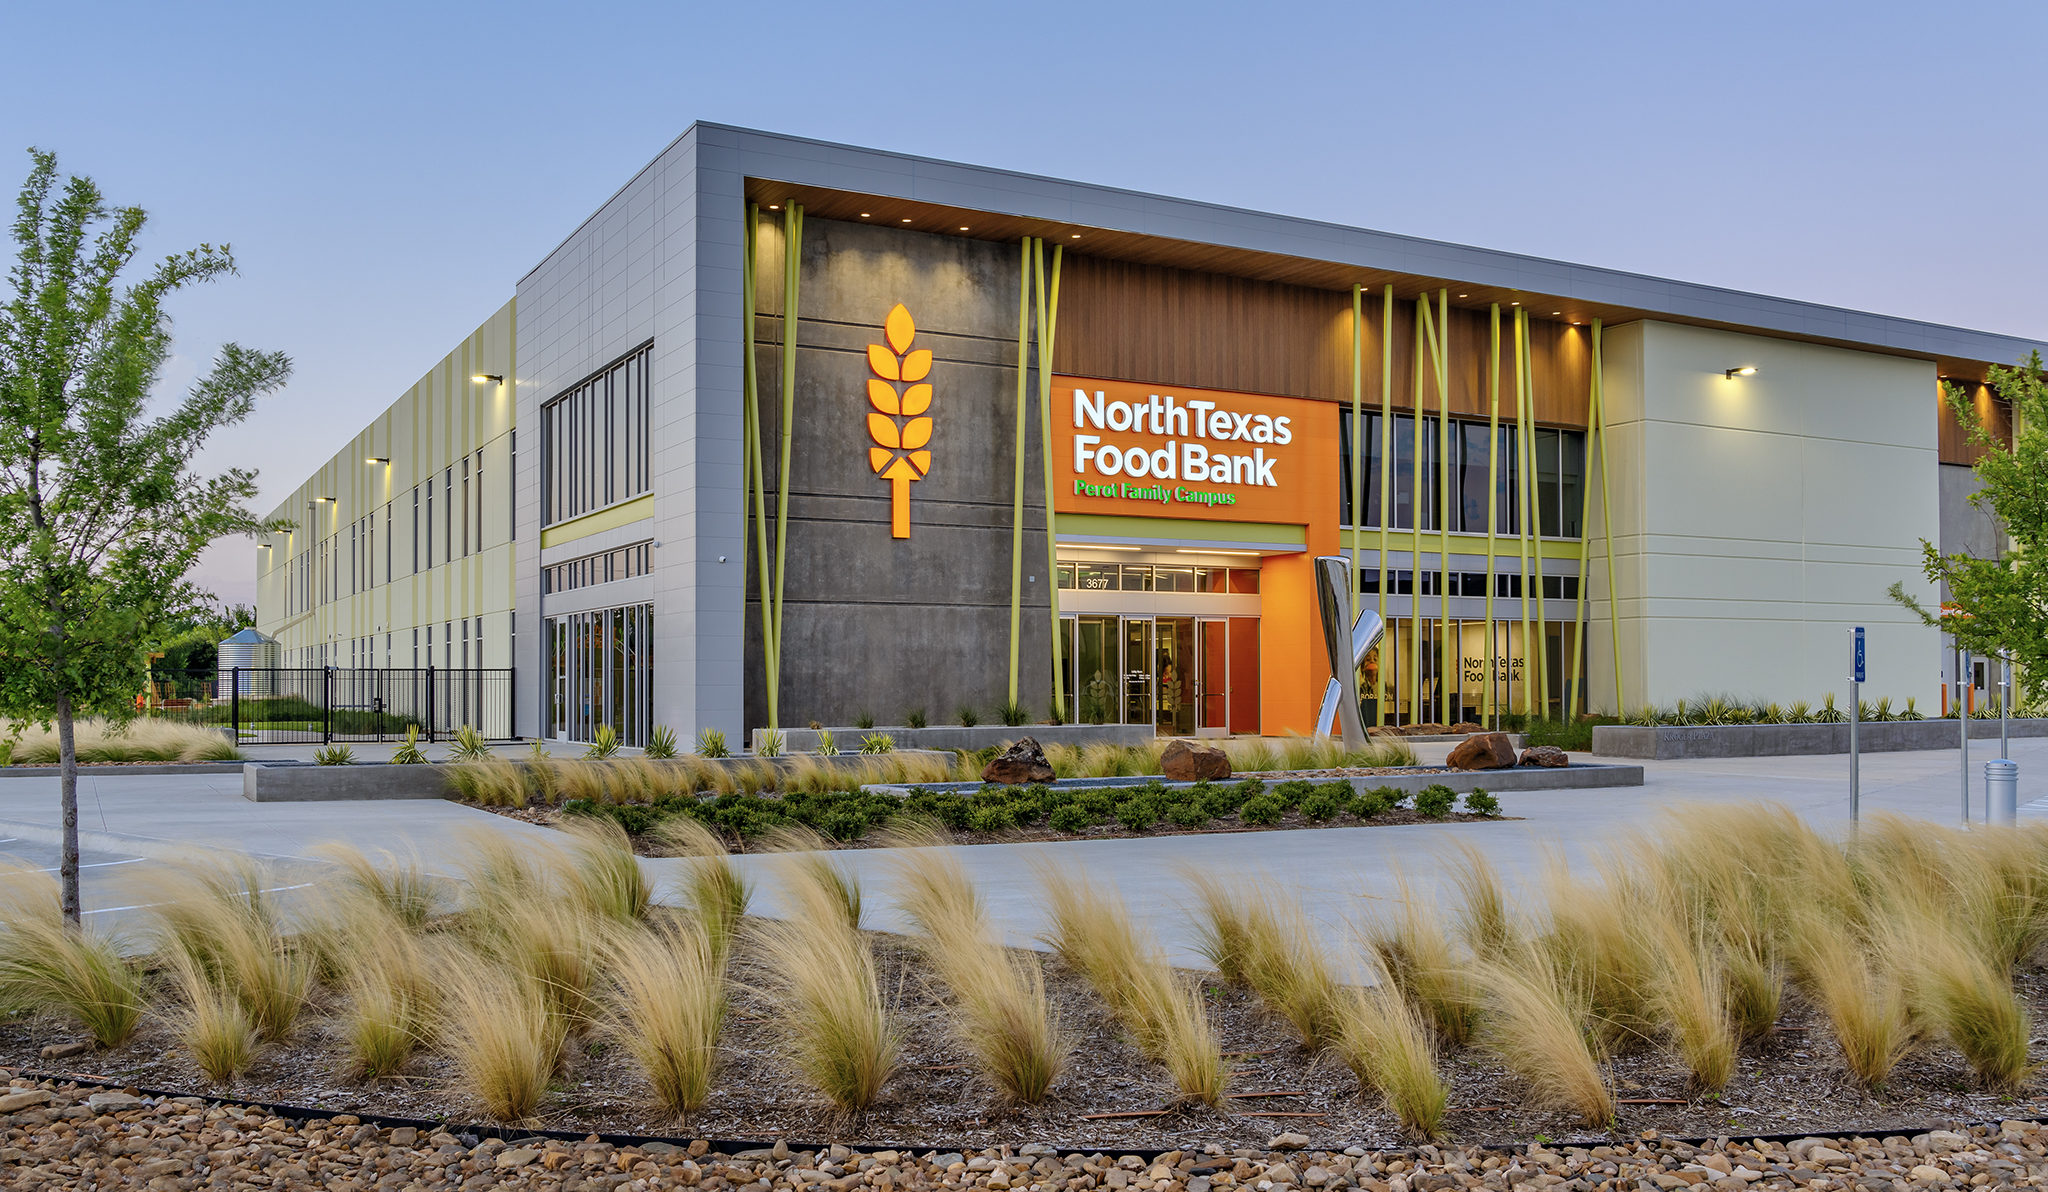 North Texas Food Bank Perot Family Campus GSR Andrade Architects